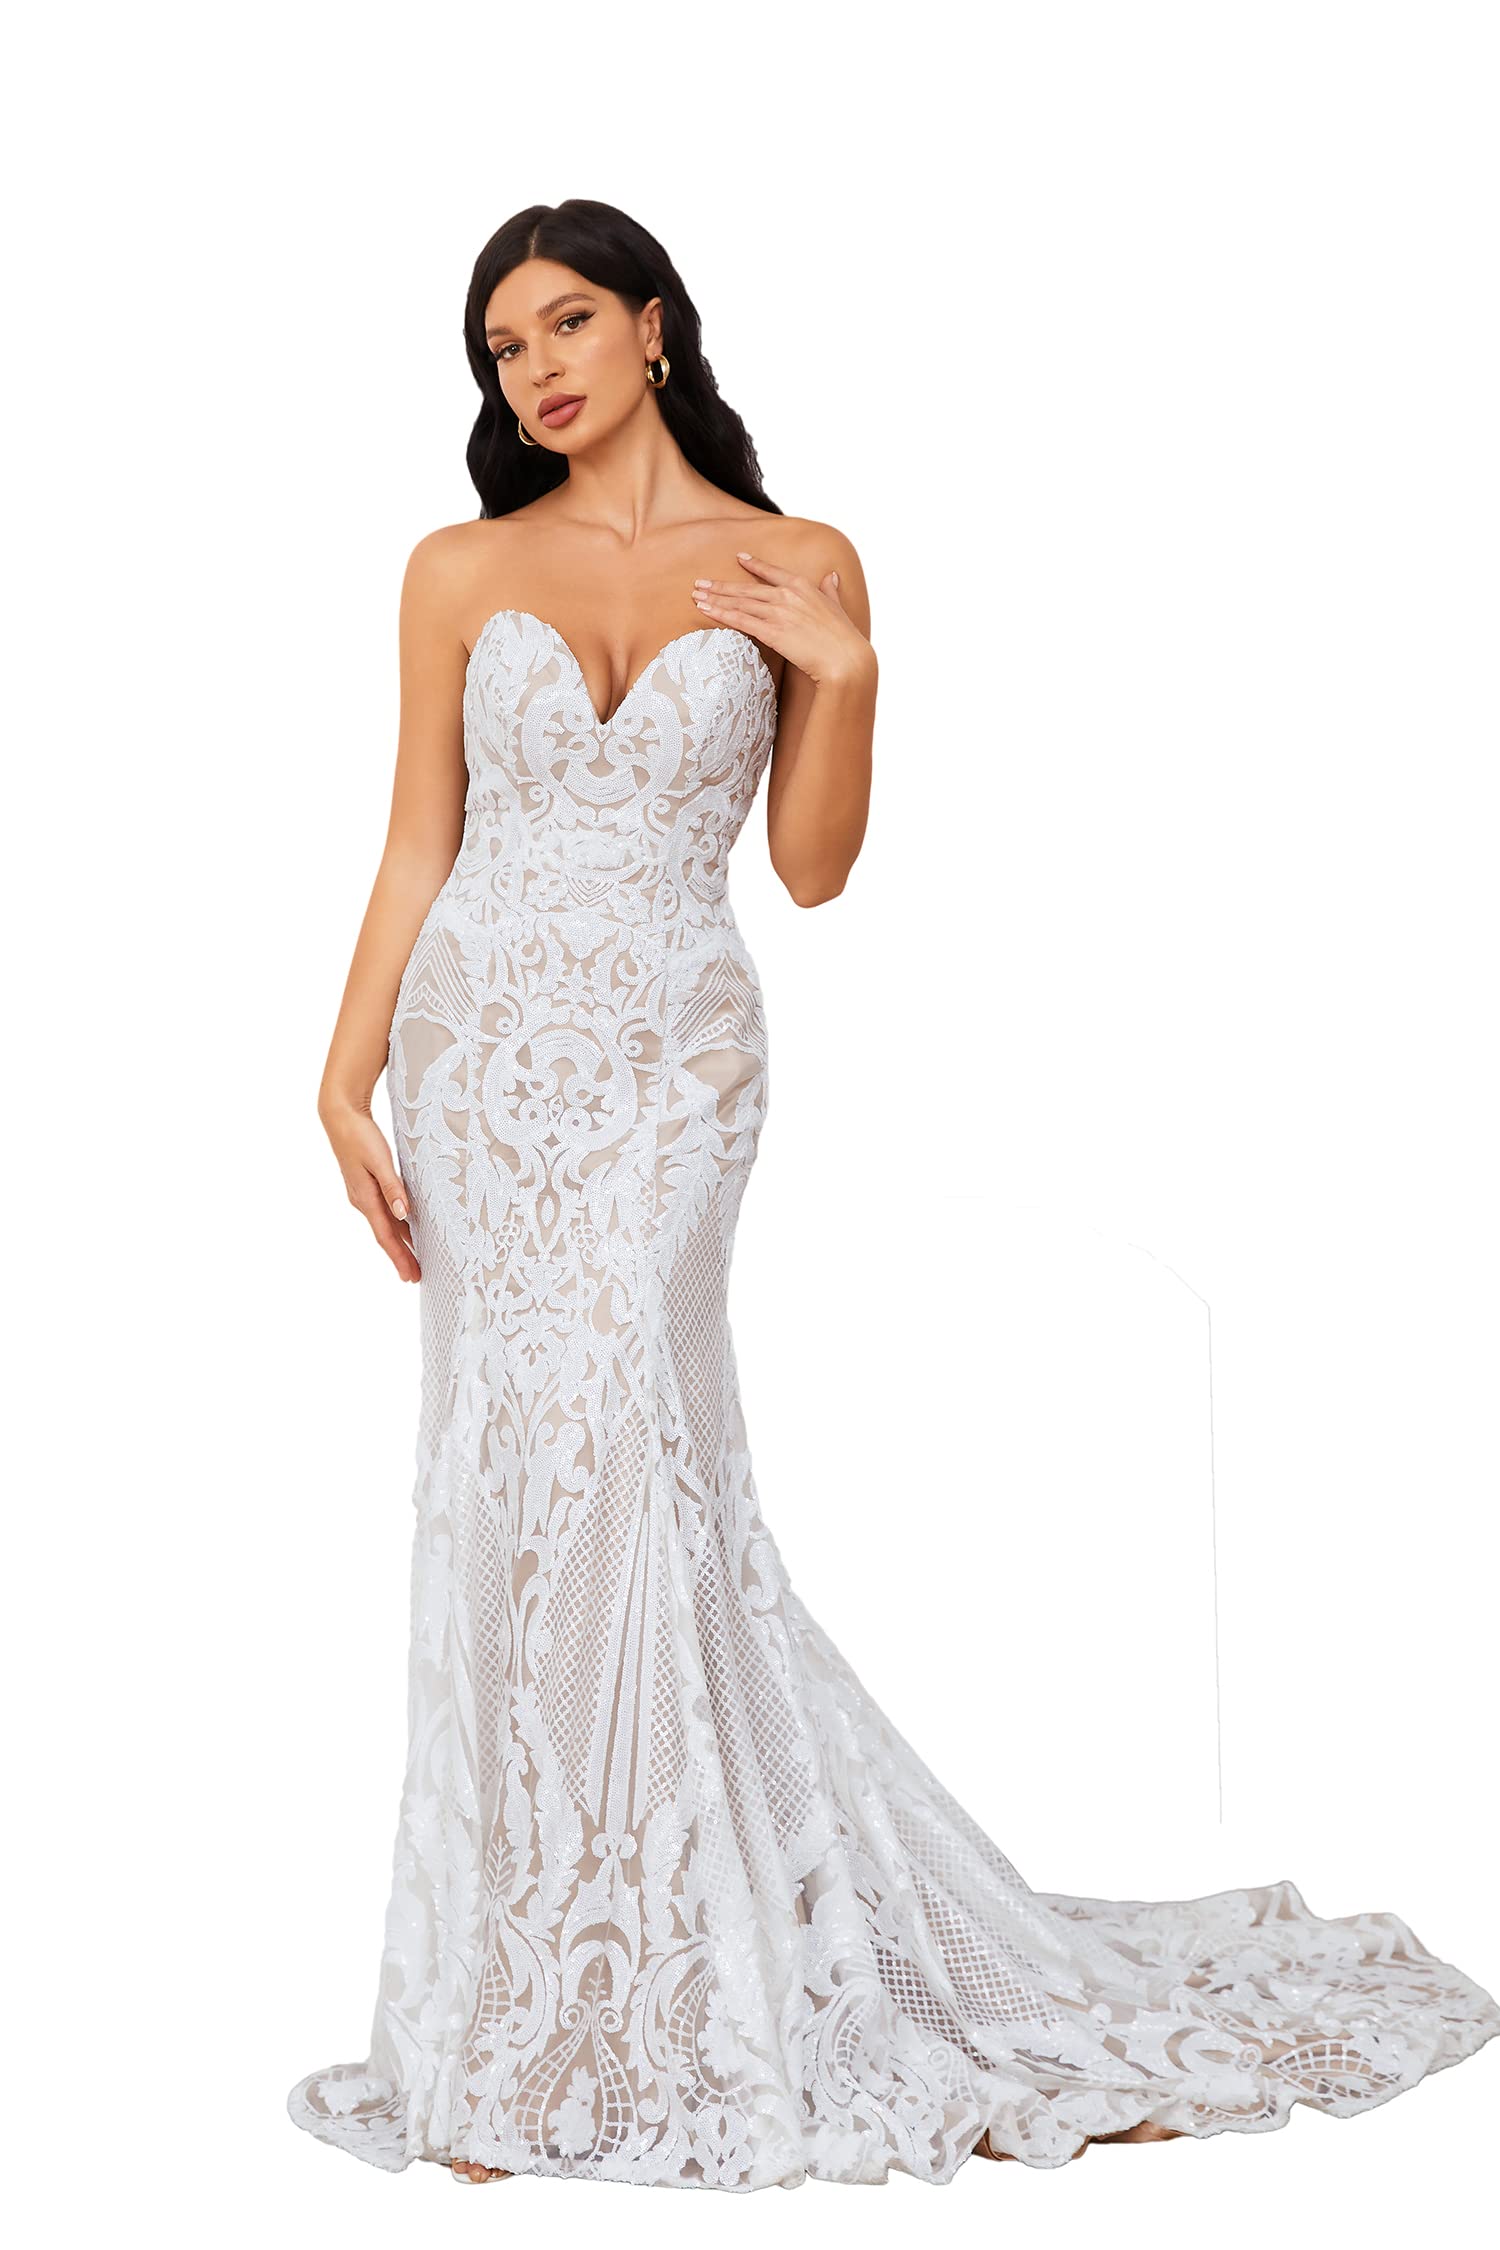 Ruolai Strapless Sweetheart Neck Special Sequined Mermaid Evening Dress Wedding Gowns